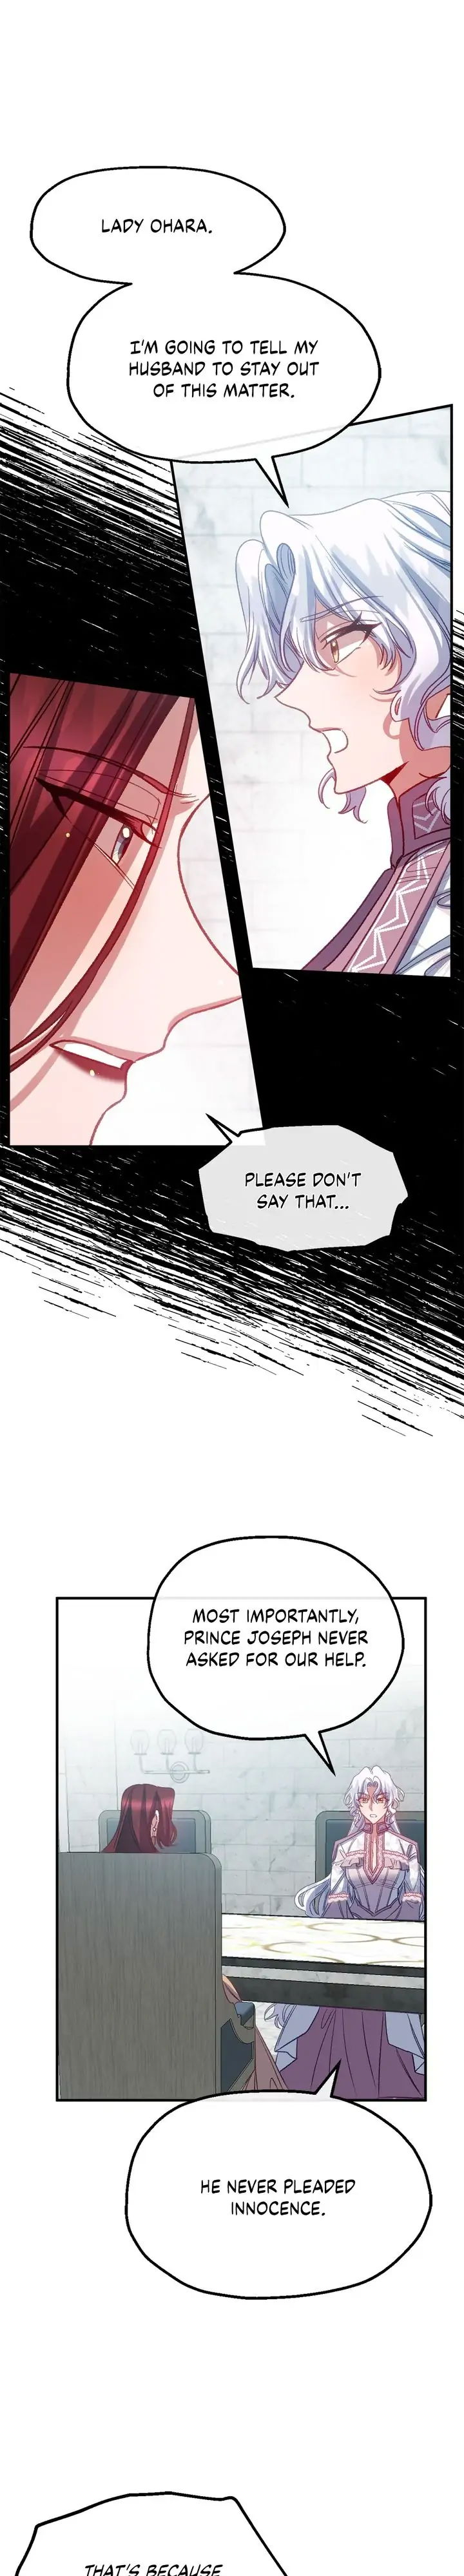 Don’t Call Me Sister Chapter 52 page 6